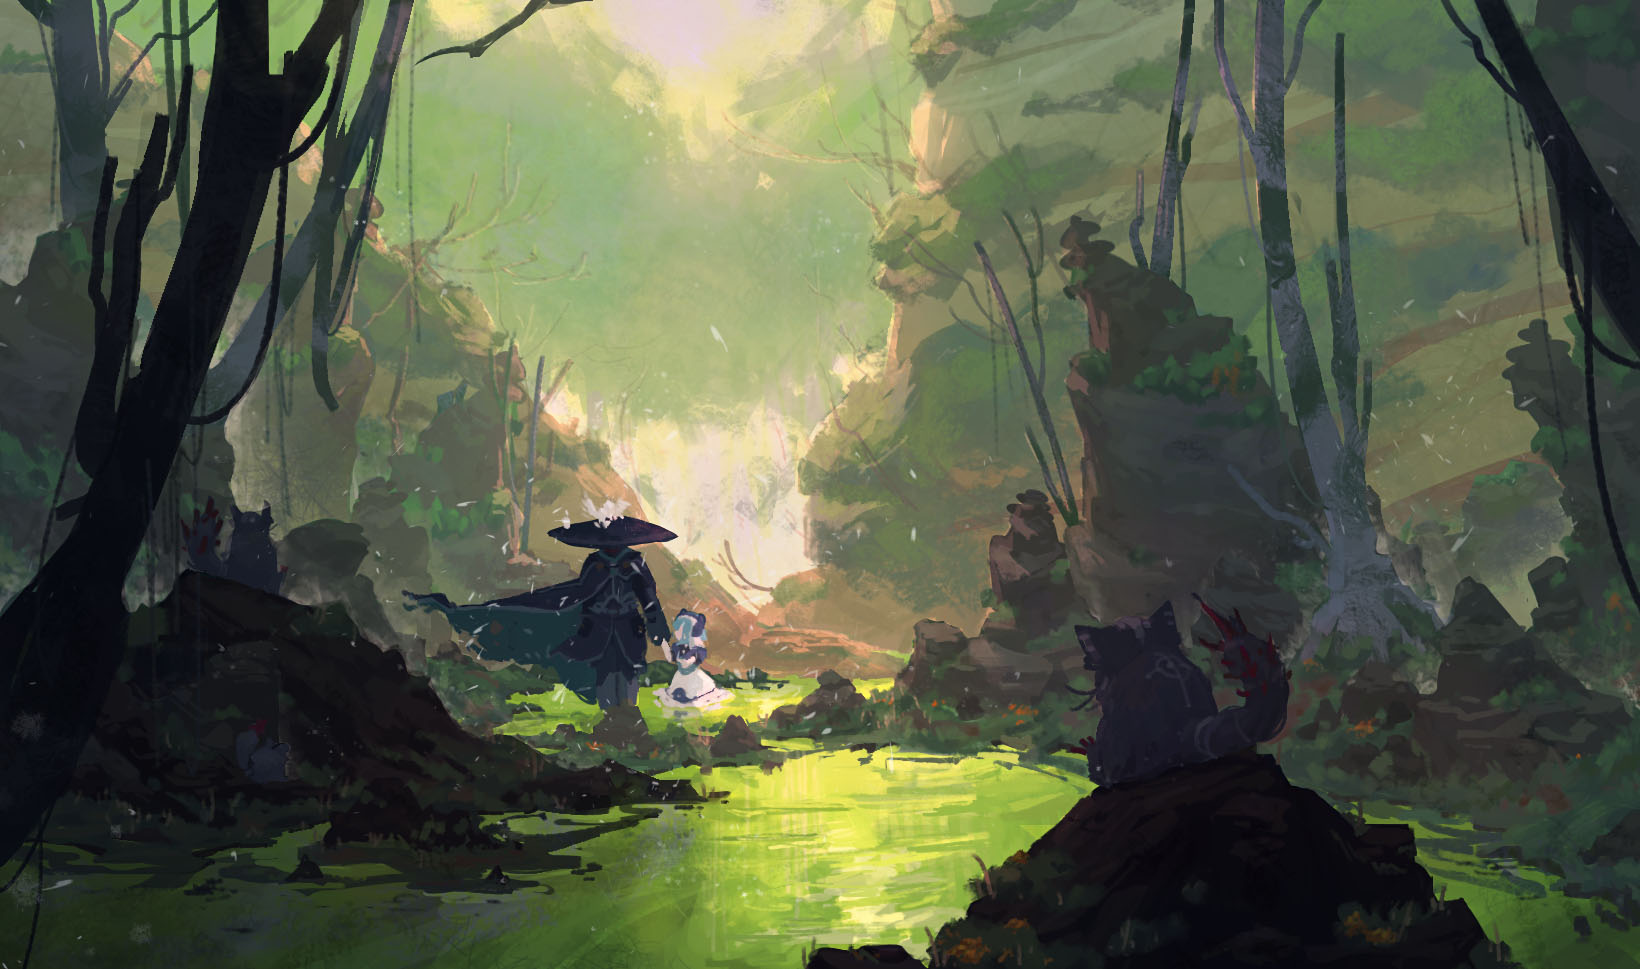 Made In Abyss Ozen Made In Abyss Fantasy Art Anime Nature Artwork Trees 1640x969